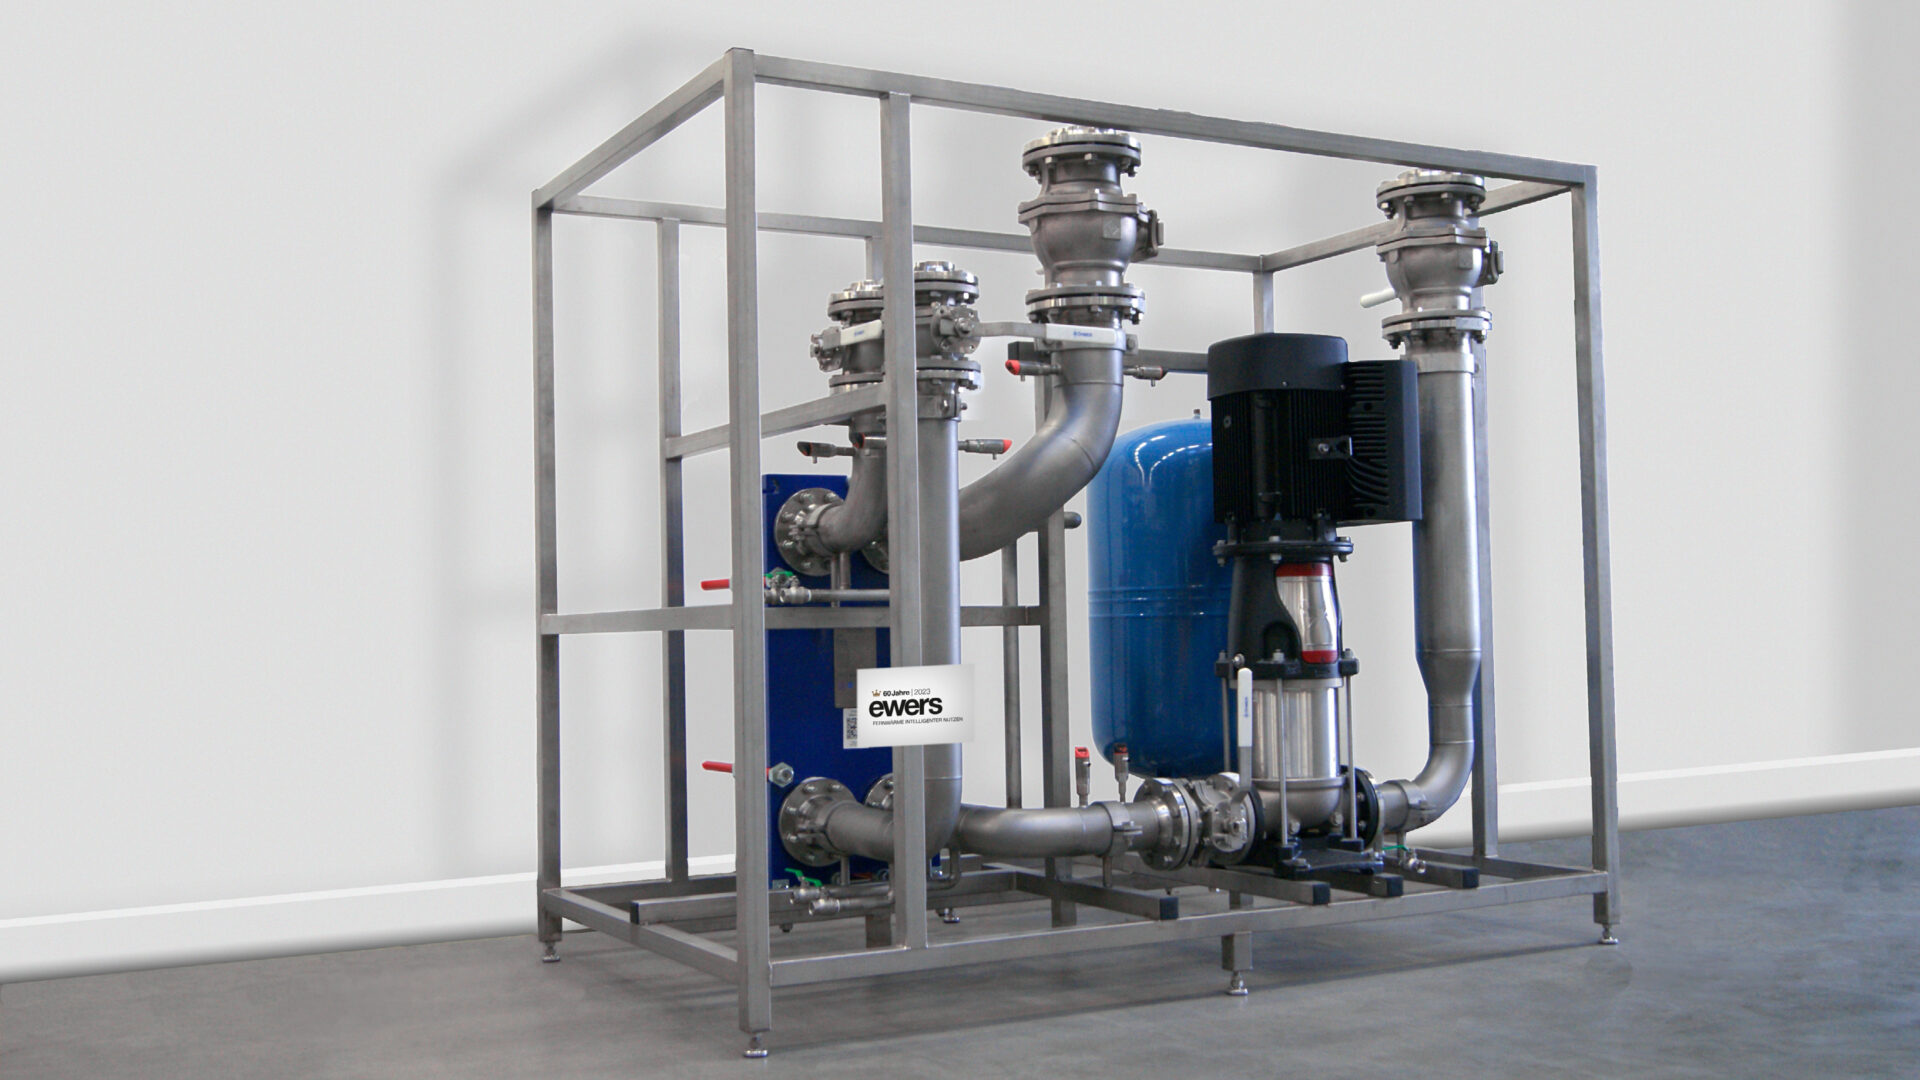 ewers drinking water heating systems - Drinking water heating - Drinking water station - Drinking water systems